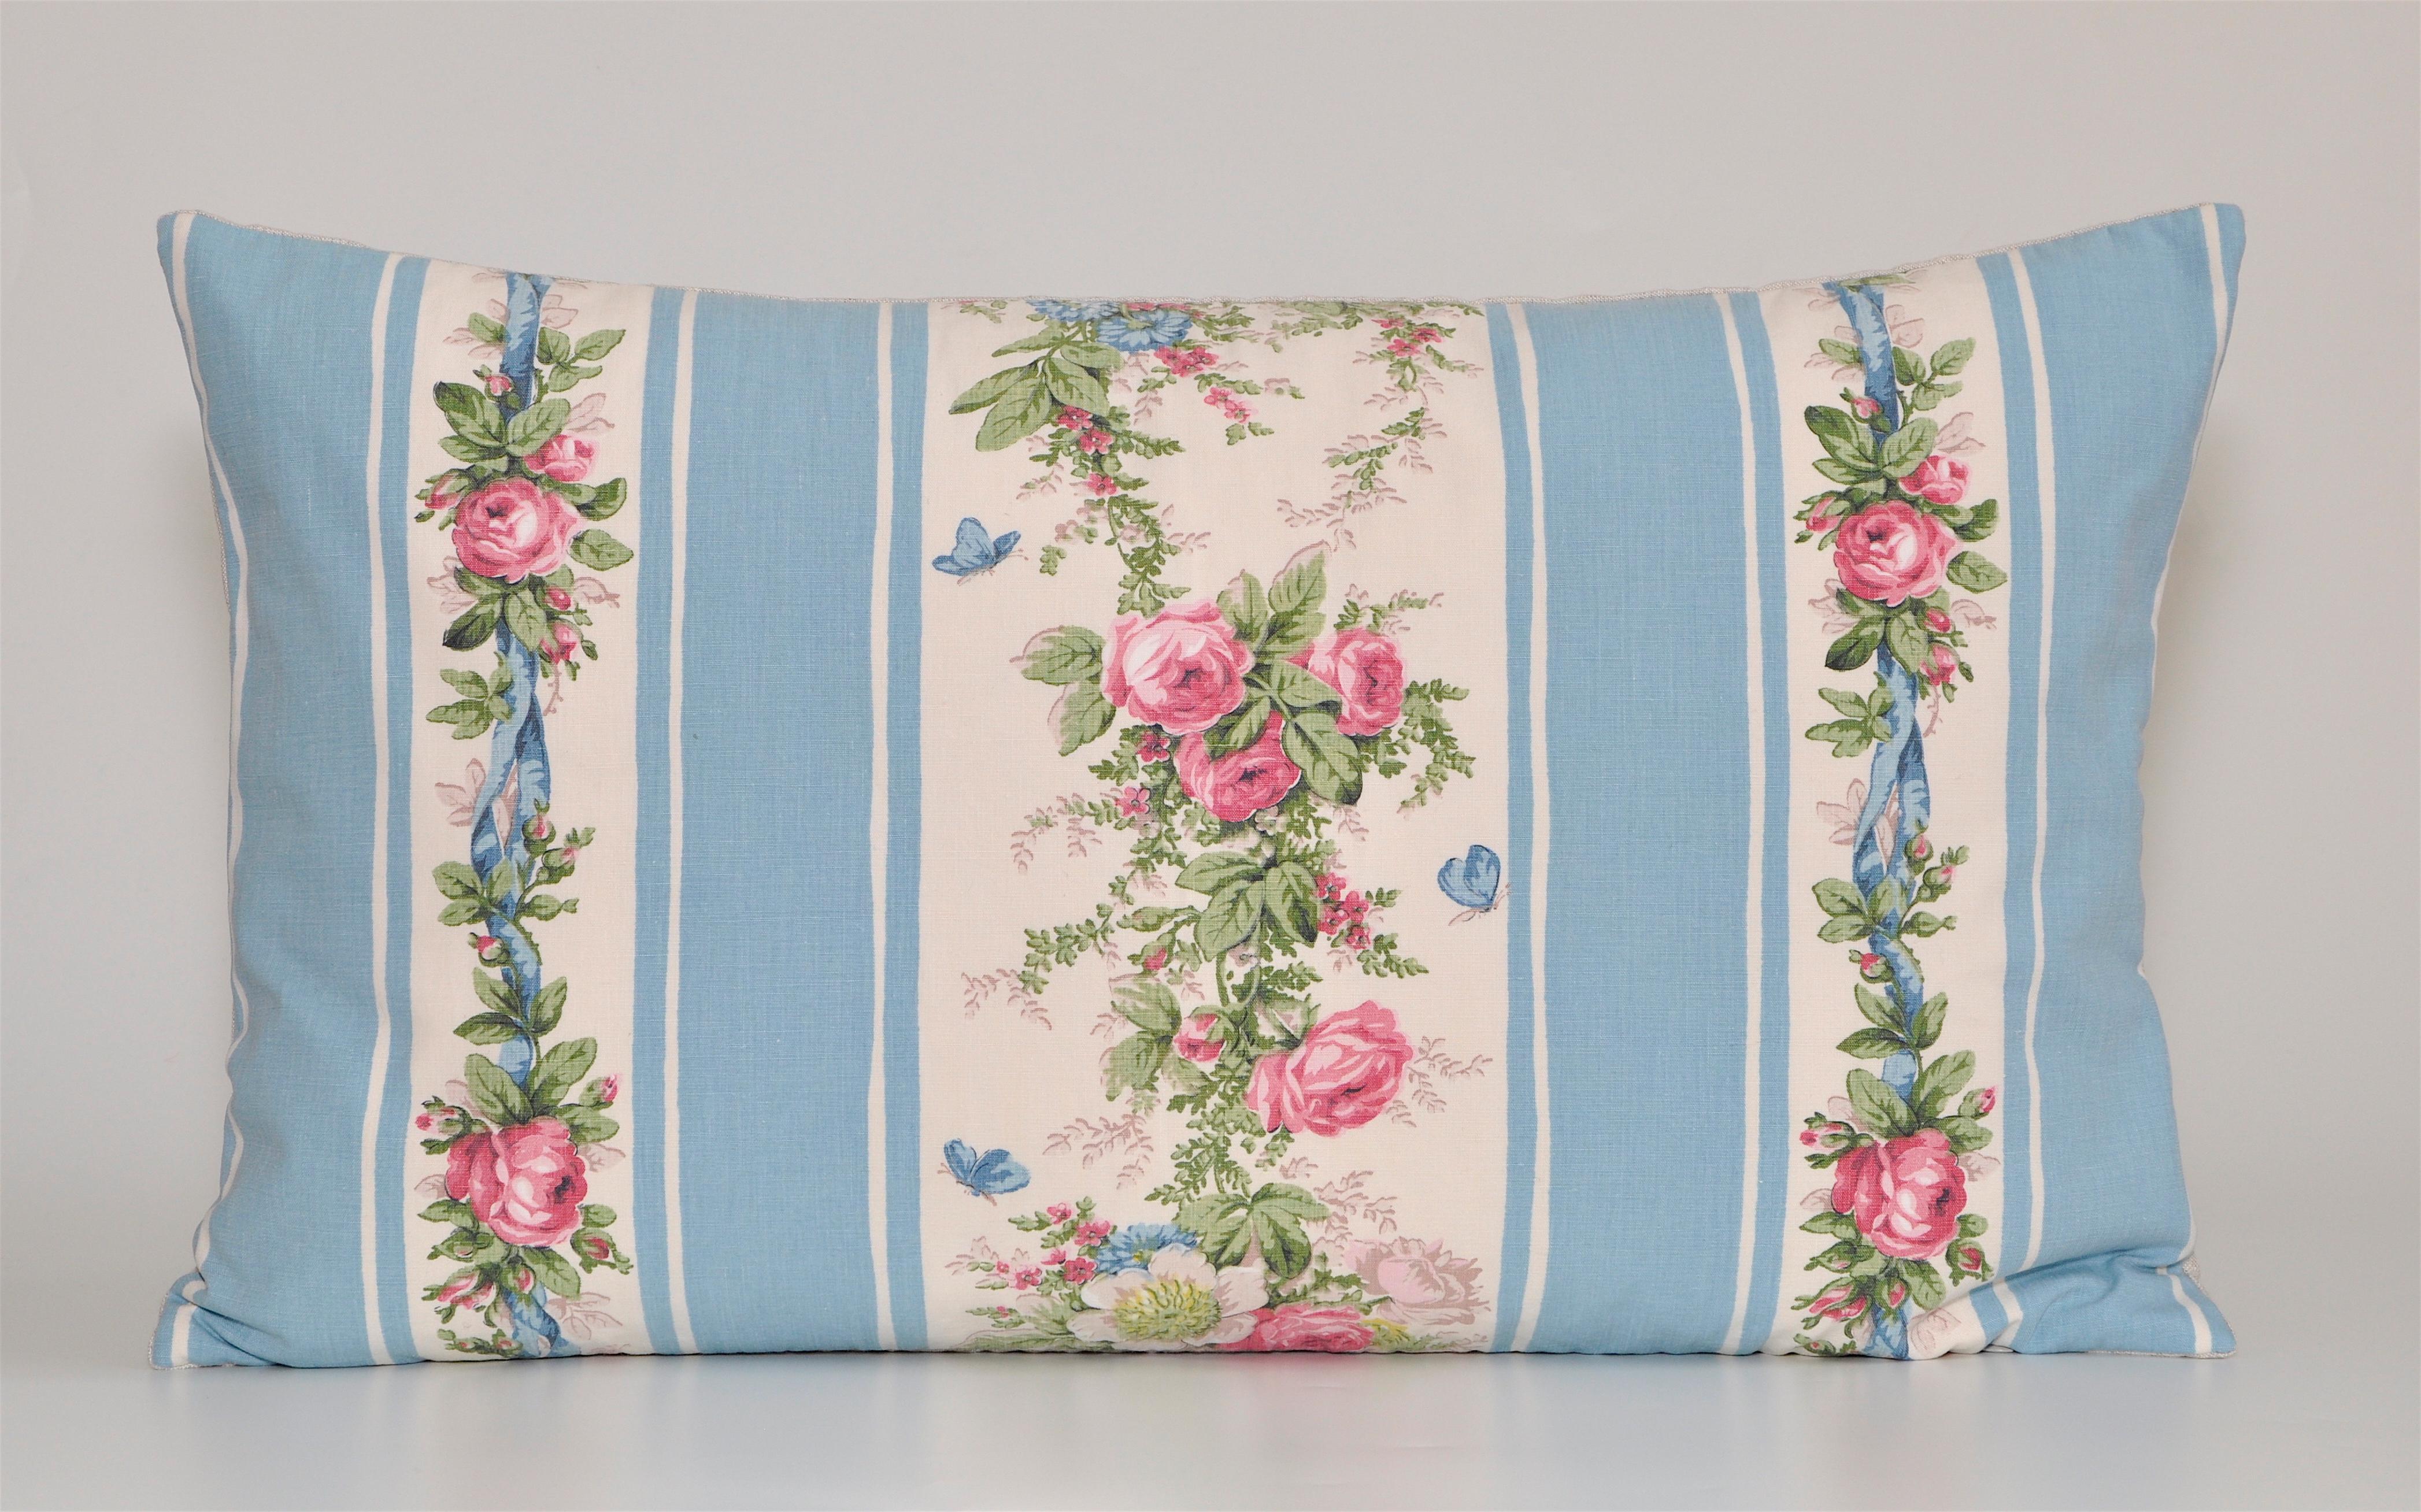 Vintage French Boussac Versailles fabric with Irish linen cushion bed pillow blue 

Custom made luxury cushions created with French vintage ‘Petit Trianon' Boussac fabric from their 'Romanex' collection in pale blue with a beautiful pattern of